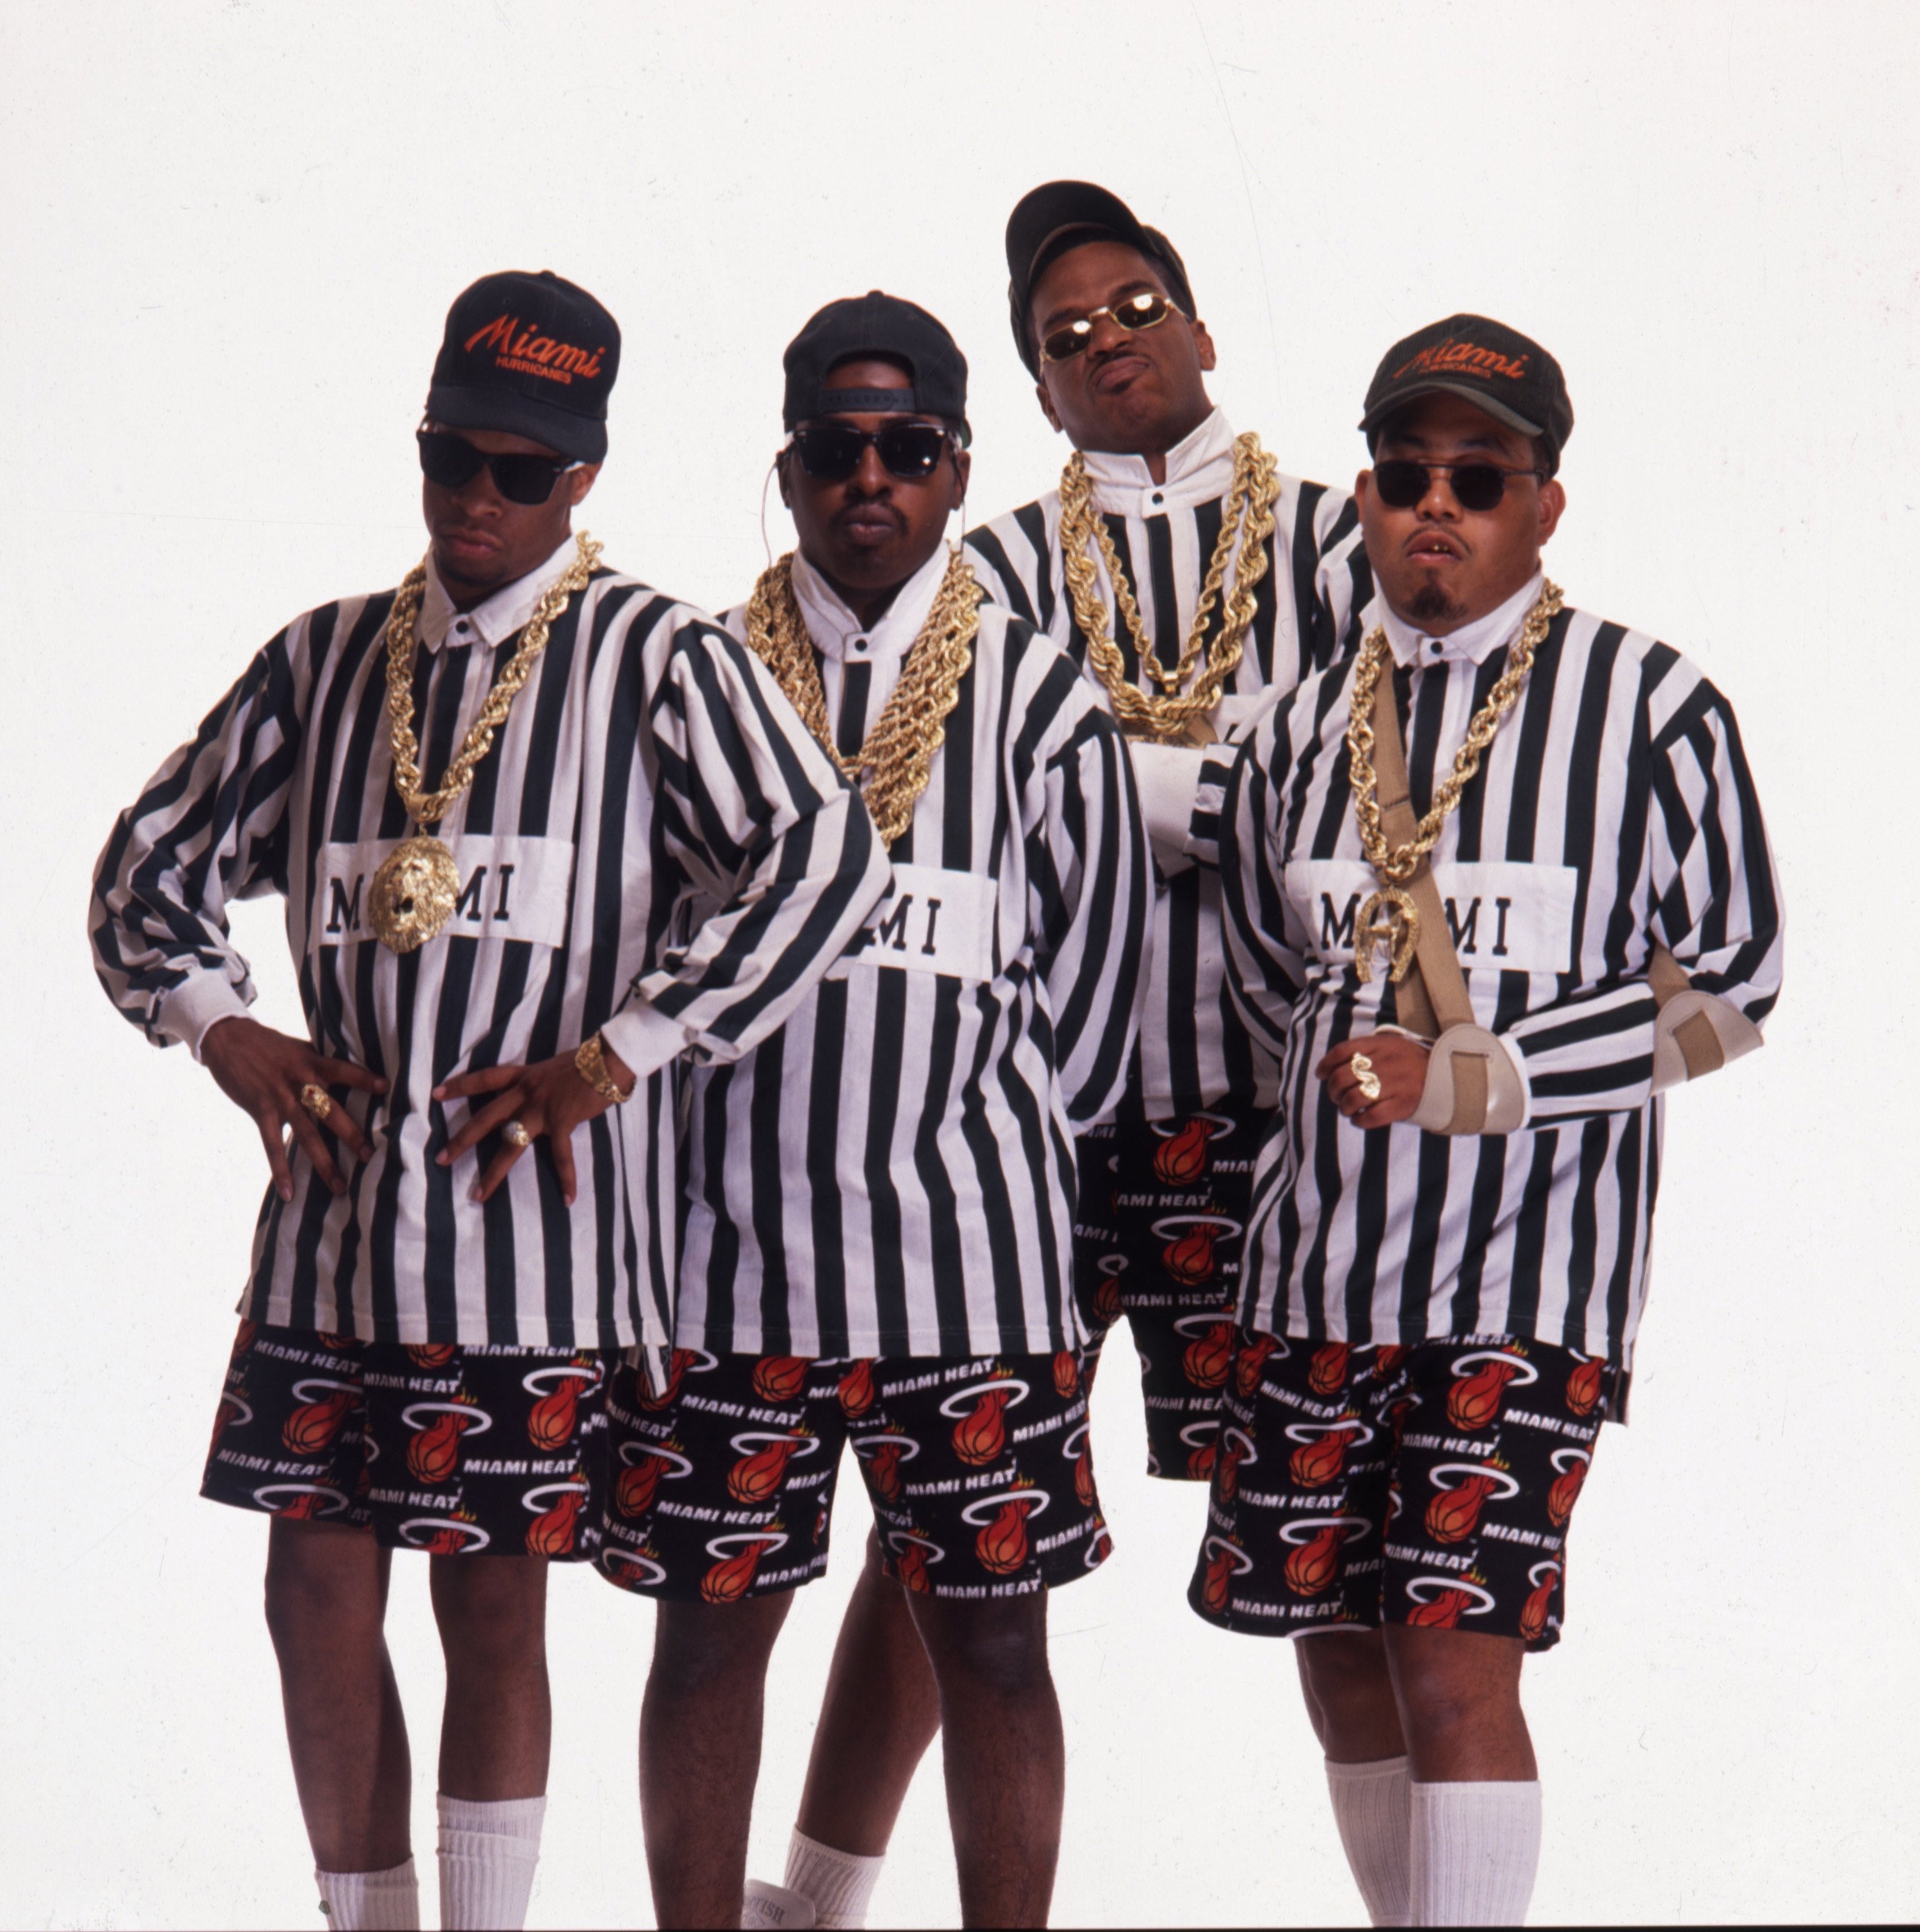 There’s A 2 Live Crew Biopic In The Works
